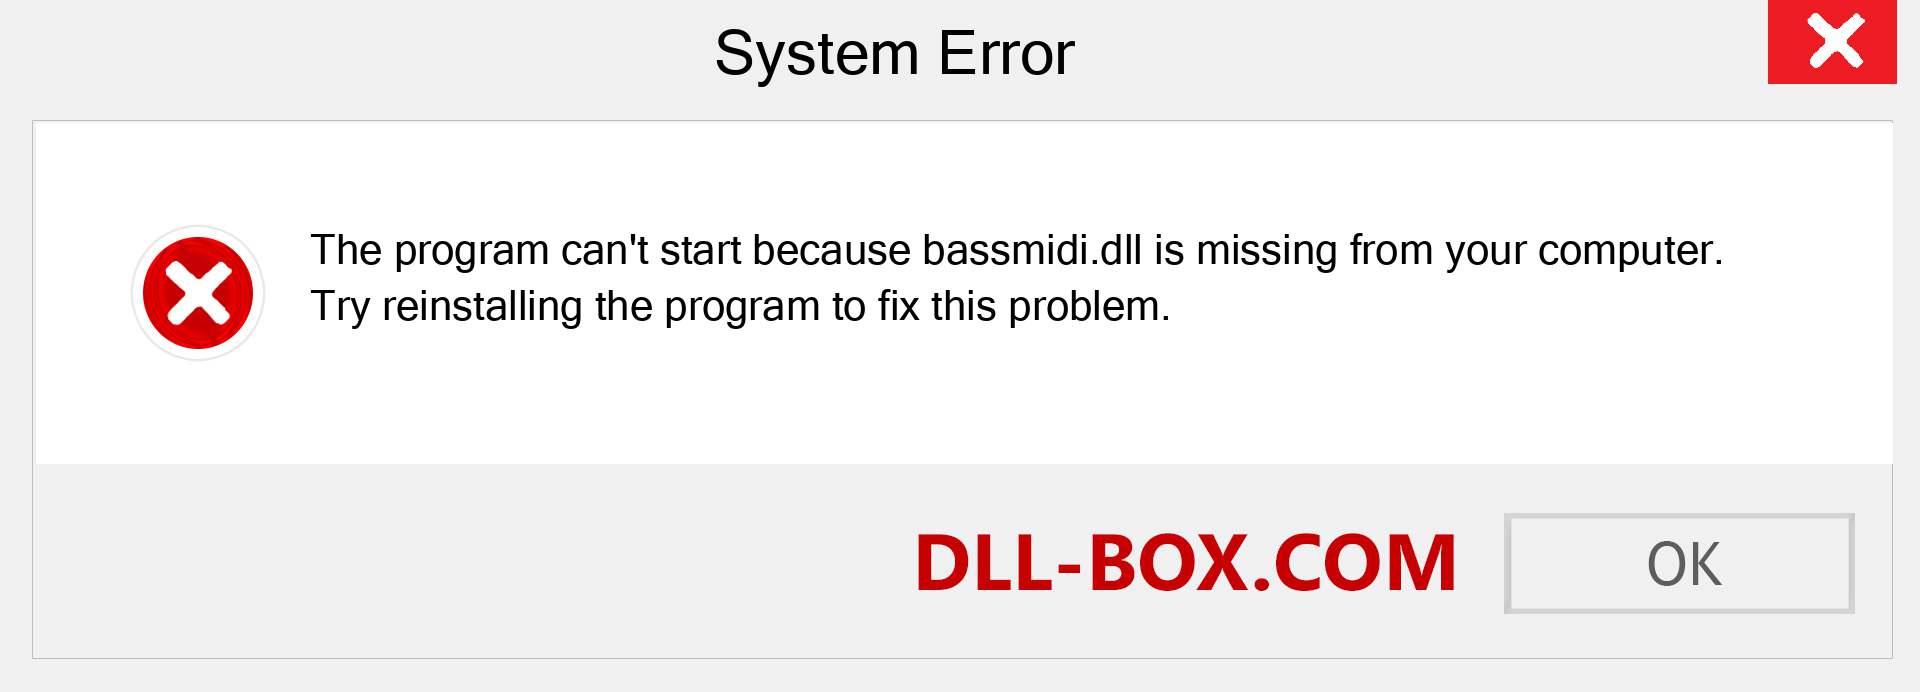  bassmidi.dll file is missing?. Download for Windows 7, 8, 10 - Fix  bassmidi dll Missing Error on Windows, photos, images